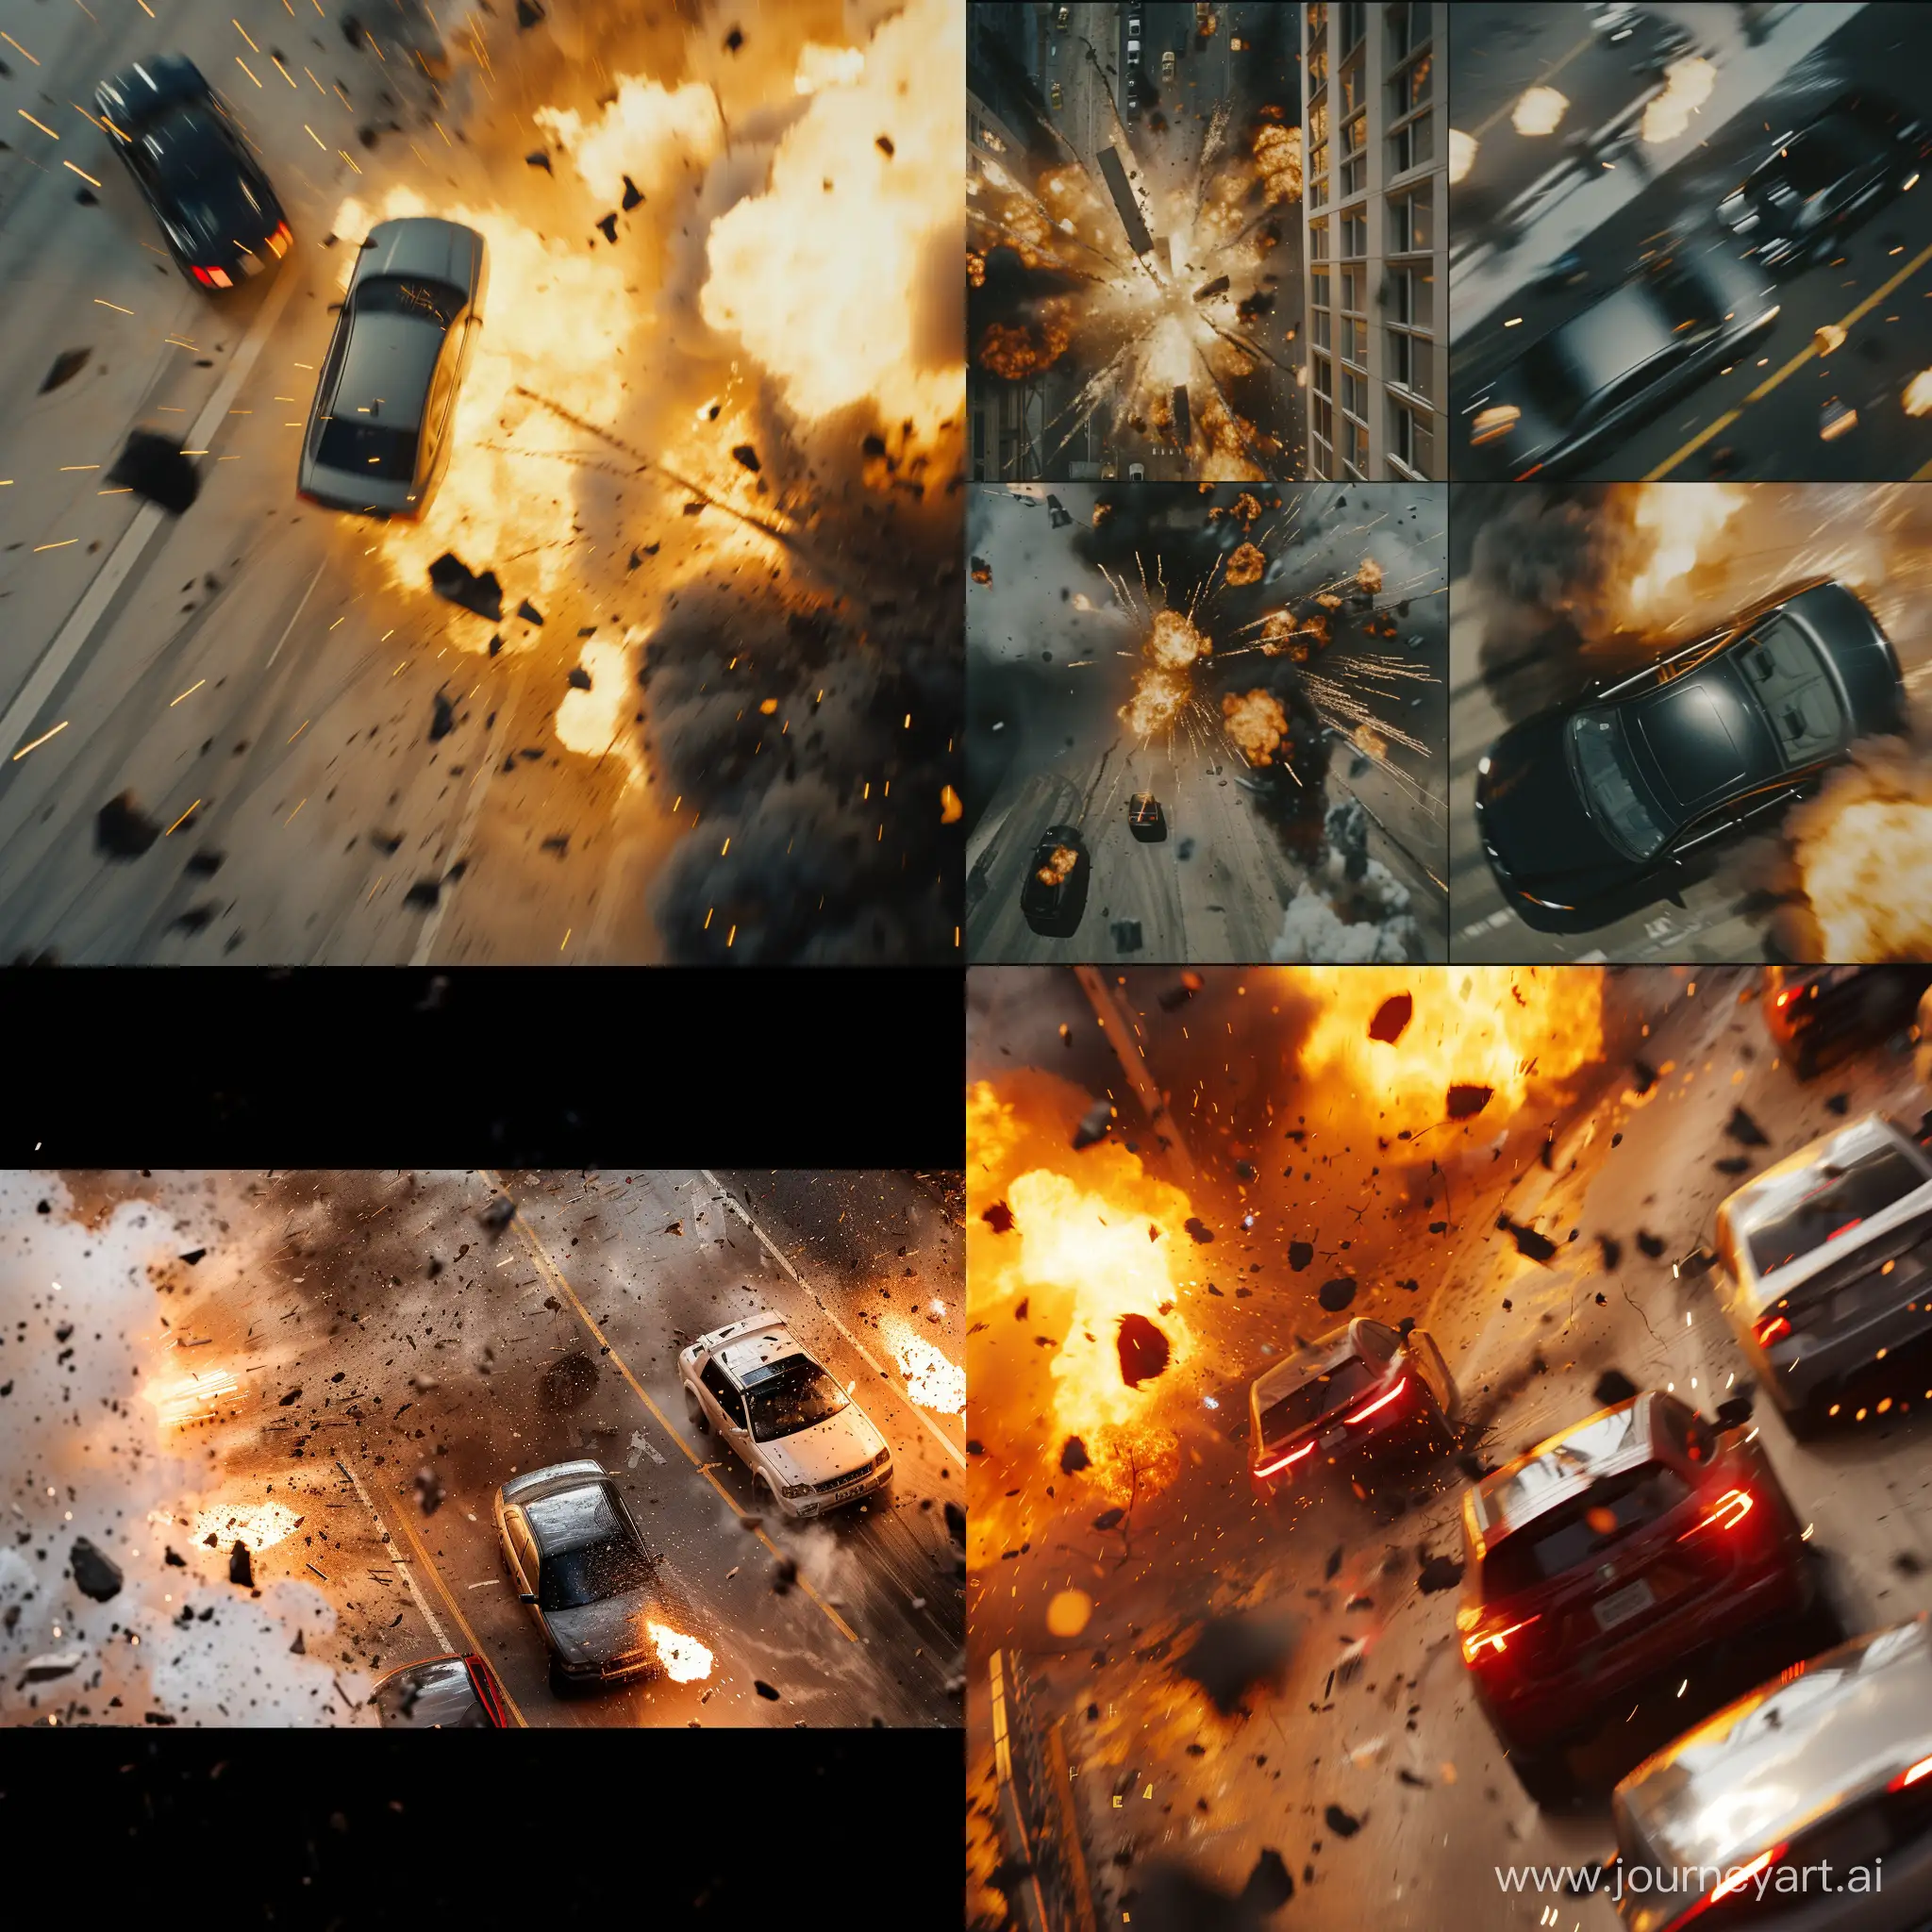 Thrilling-Car-Chases-Explosions-and-Gunfire-Unleashed-in-a-World-of-Deception-and-Danger